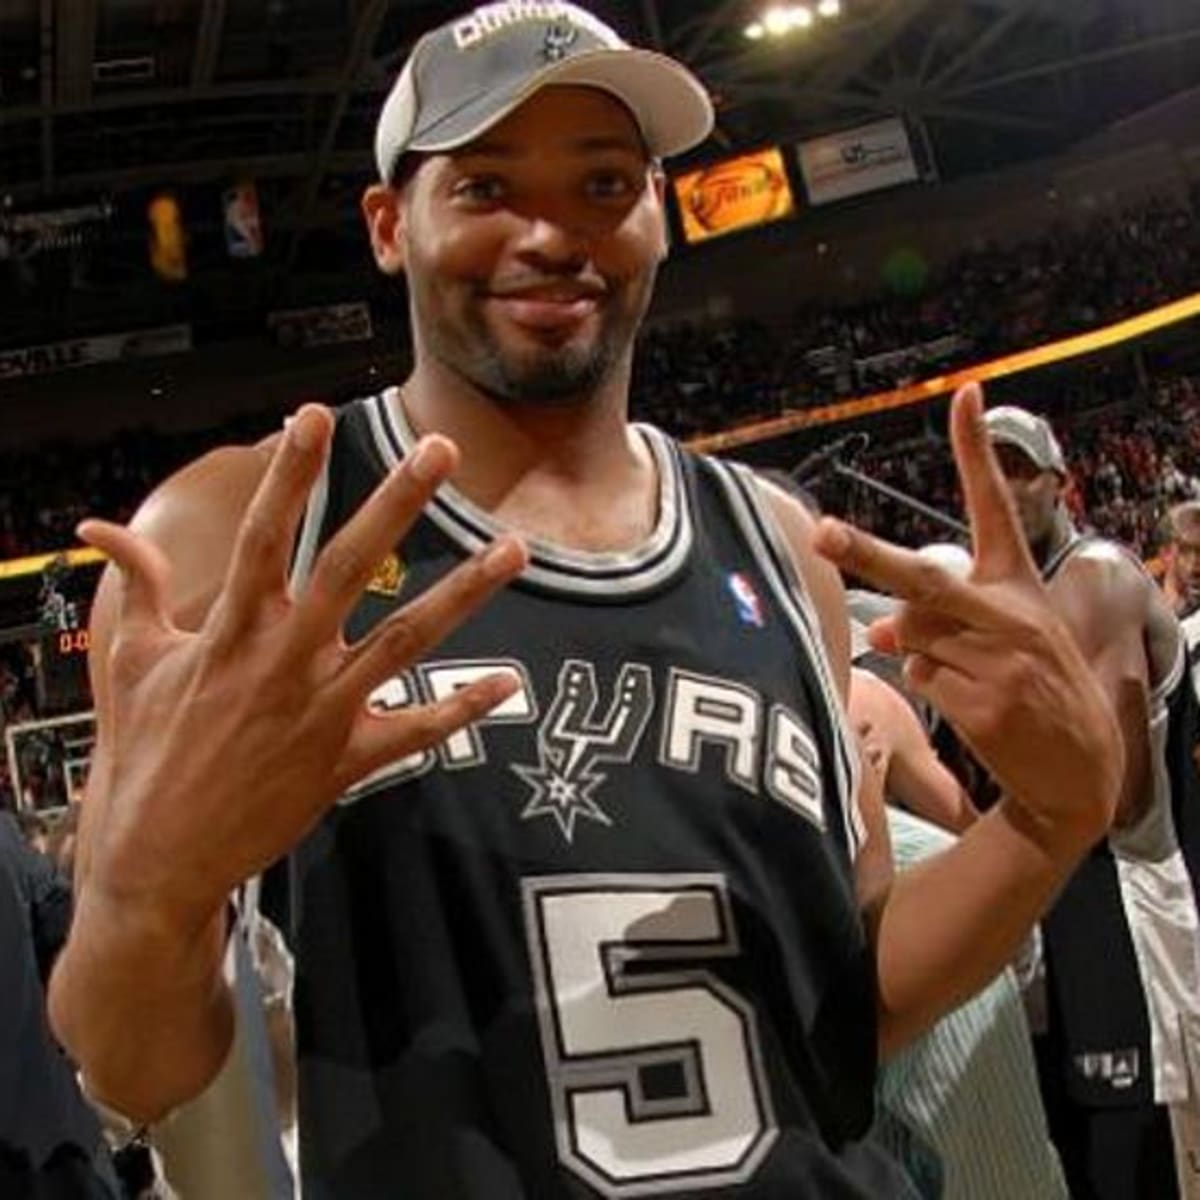 We forget about the people who don't make noise” - Robert Horry on